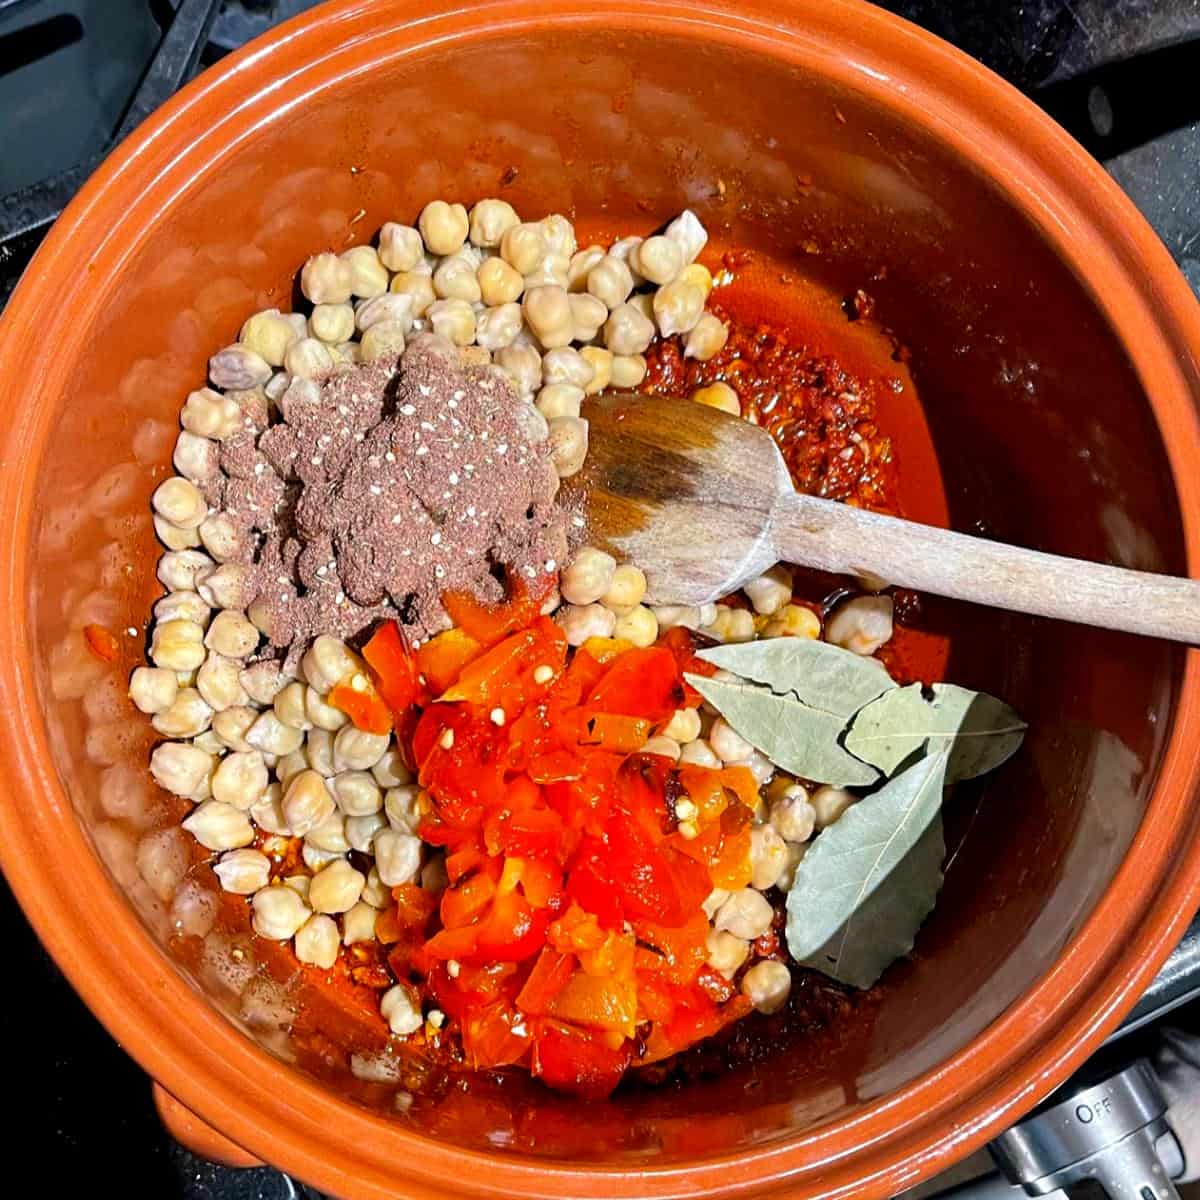 Za'atar, bay leaves and red peppers added to chickpeas and spices in clay pot.